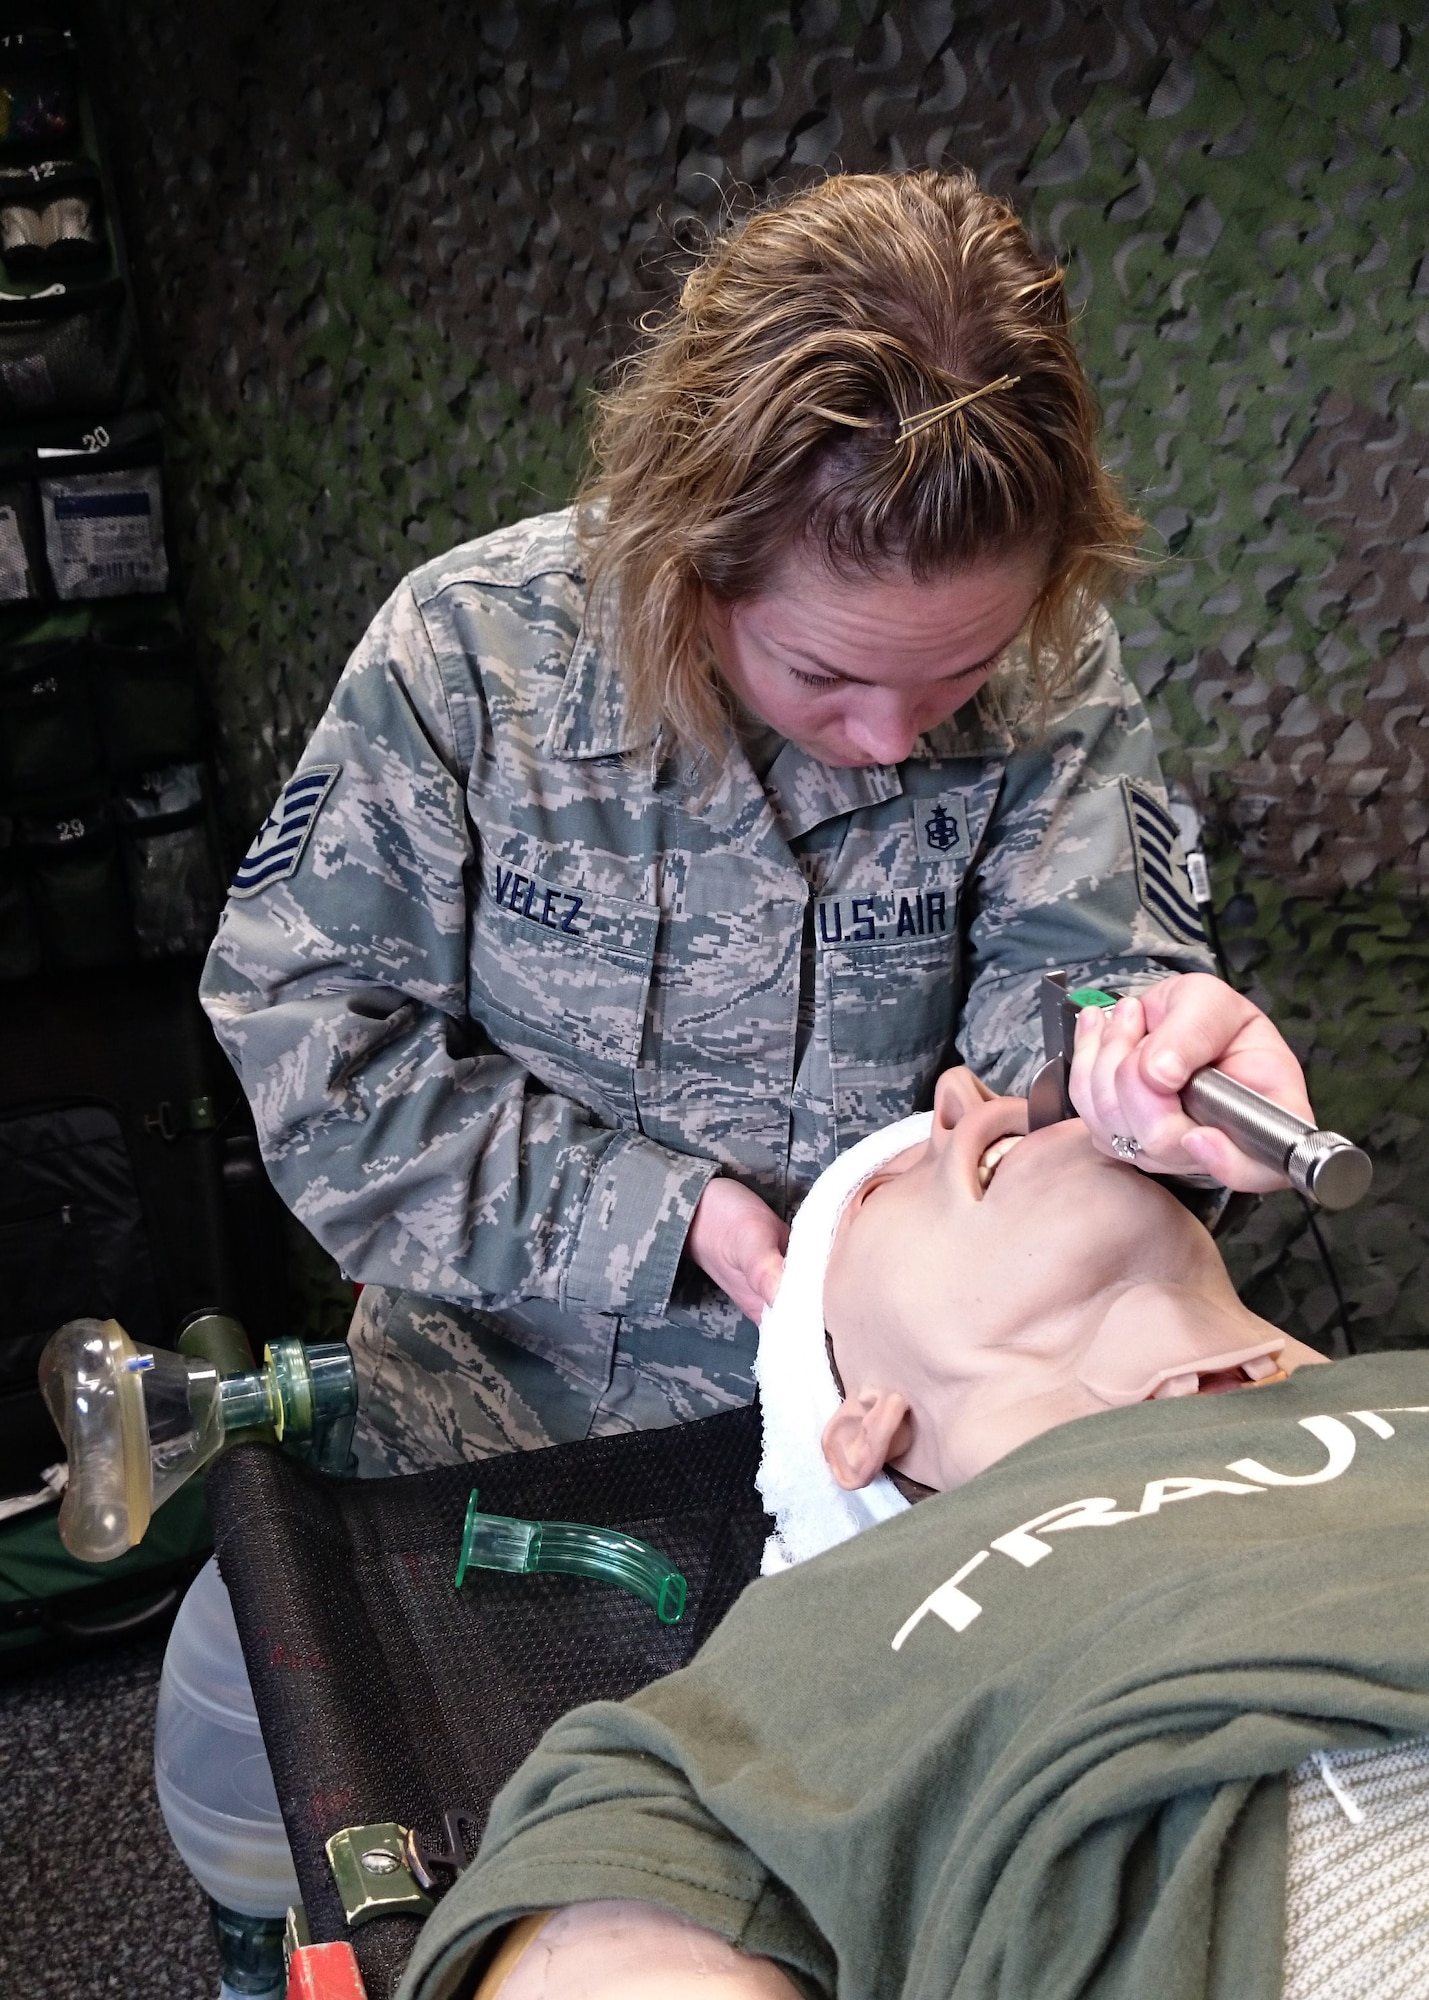 Tech Sgt. Cortney Velez, 435th Contingency Response Support Squadron independent duty medical technician, simulates opening an airway at Ramstein Air Base, Germany, May 17, 2017. Velez is U.S. Air Forces in Europe’s first female airborne IDMT. (U.S. Air Force photo by Staff Sgt. Nesha Humes)